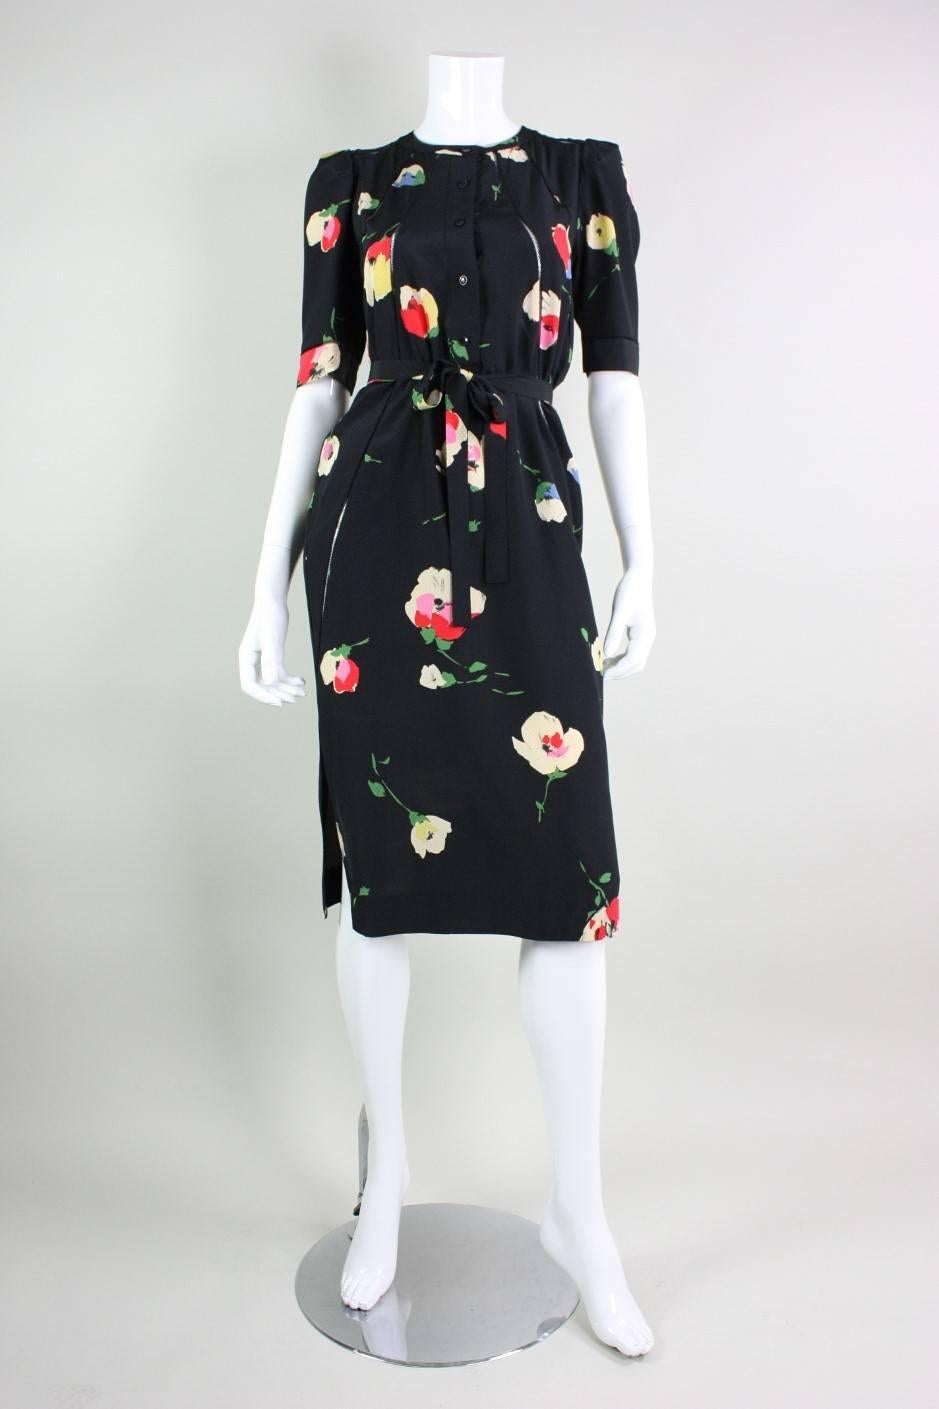 Vintage dress from Chloe dates to the 1970's and gives nod to the styles of the 1940's.  It is made of a textured black silk fabric with a multicolor silk floral print.    Interesting seaming detail leaves skin exposed underneath.  Unlined.  Center